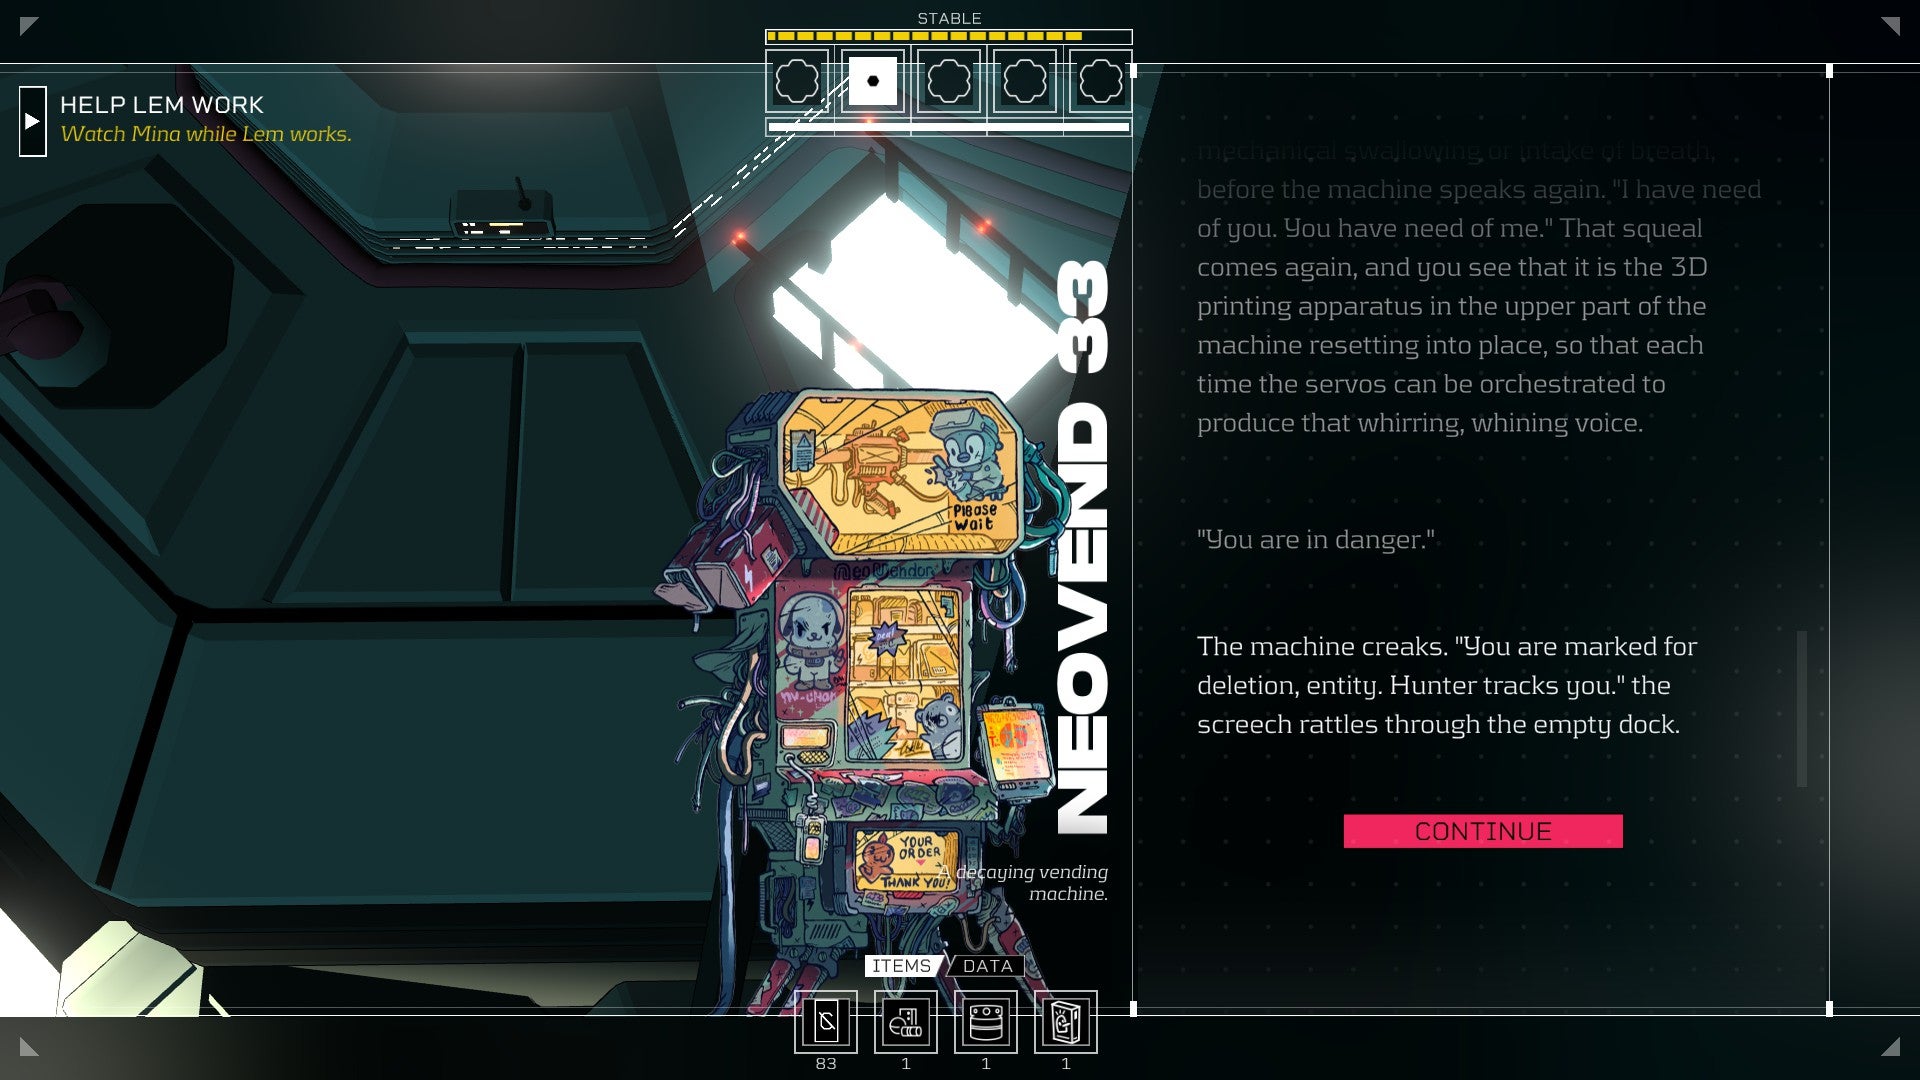 Citizen Sleeper review - Dialogue with an AI of sorts called NEOVEND 33, a kind of haunted vending machine.